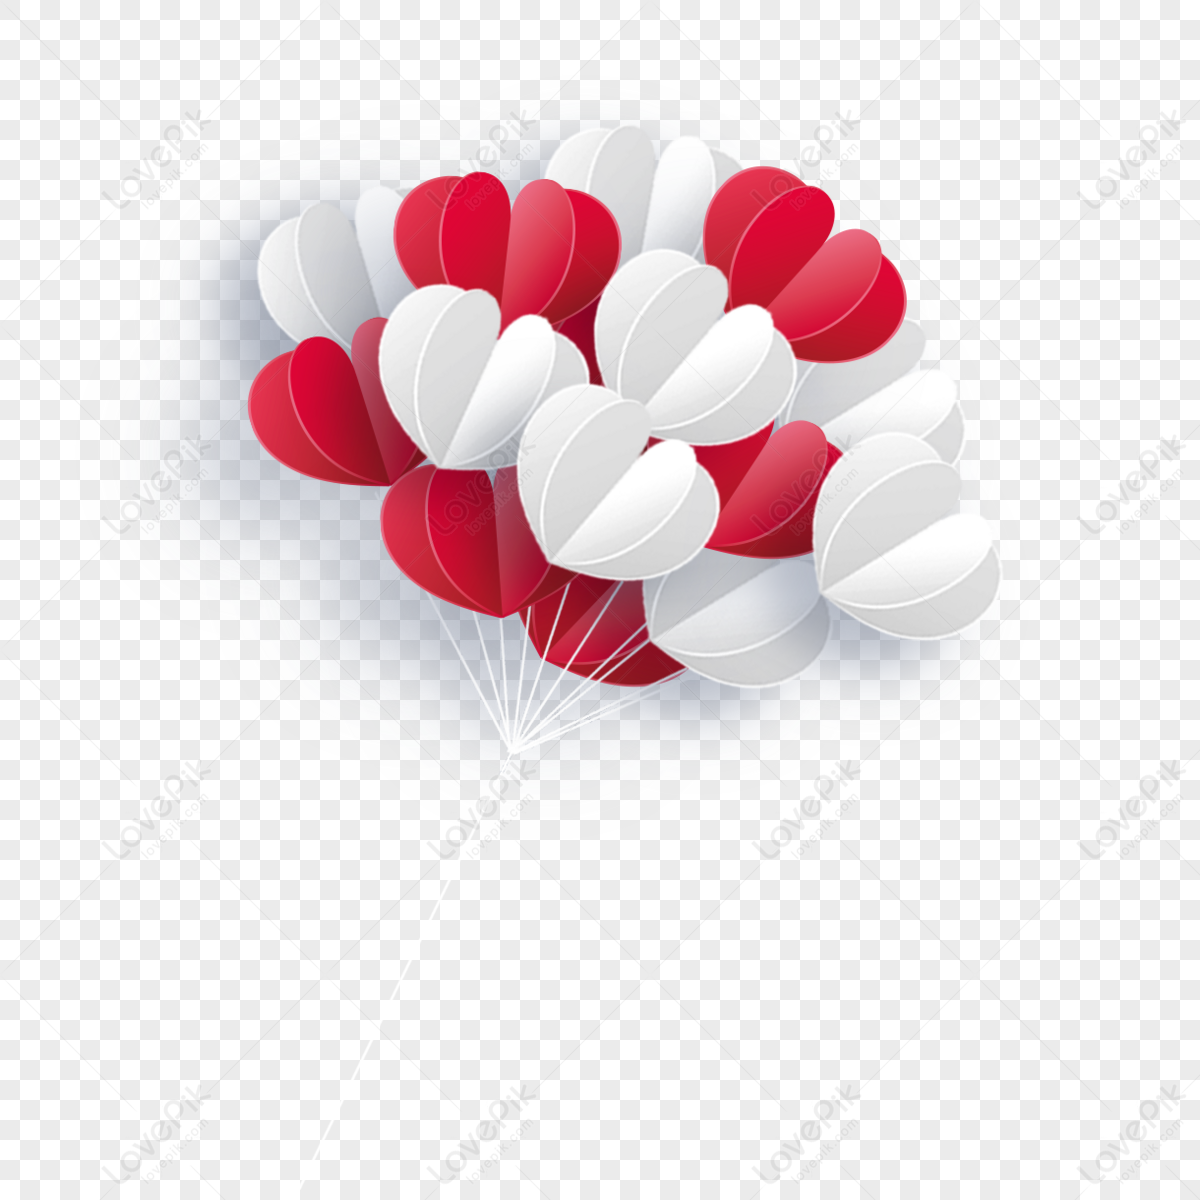 Balloon String PNG Transparent, Illustrator Wind Colorful Balloon